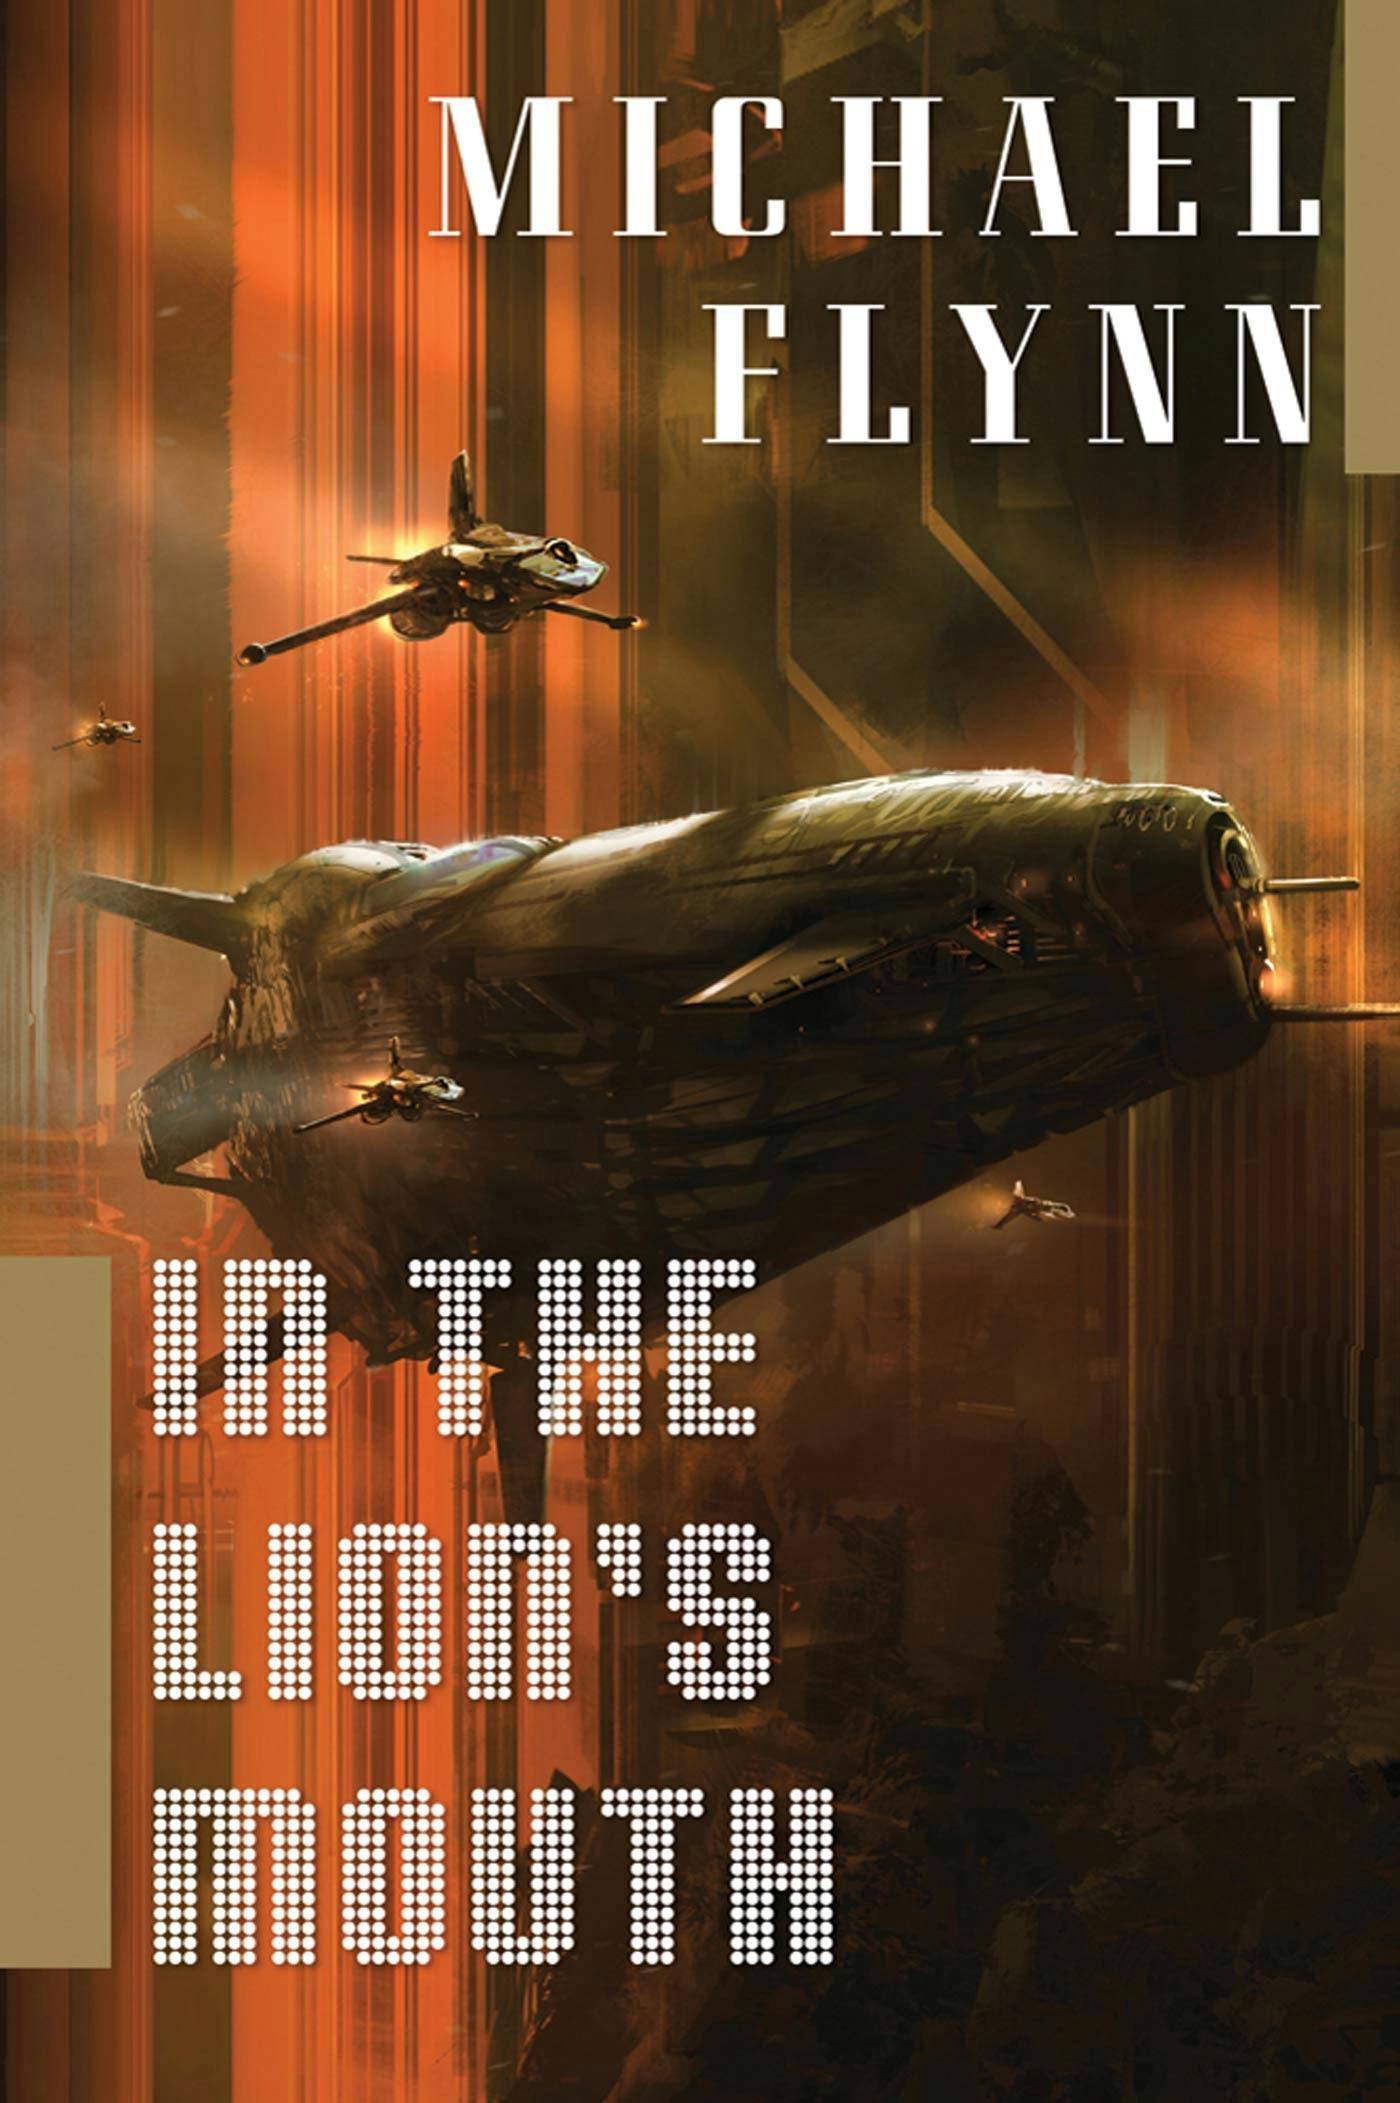 Cover for the book titled as: In the Lion's Mouth